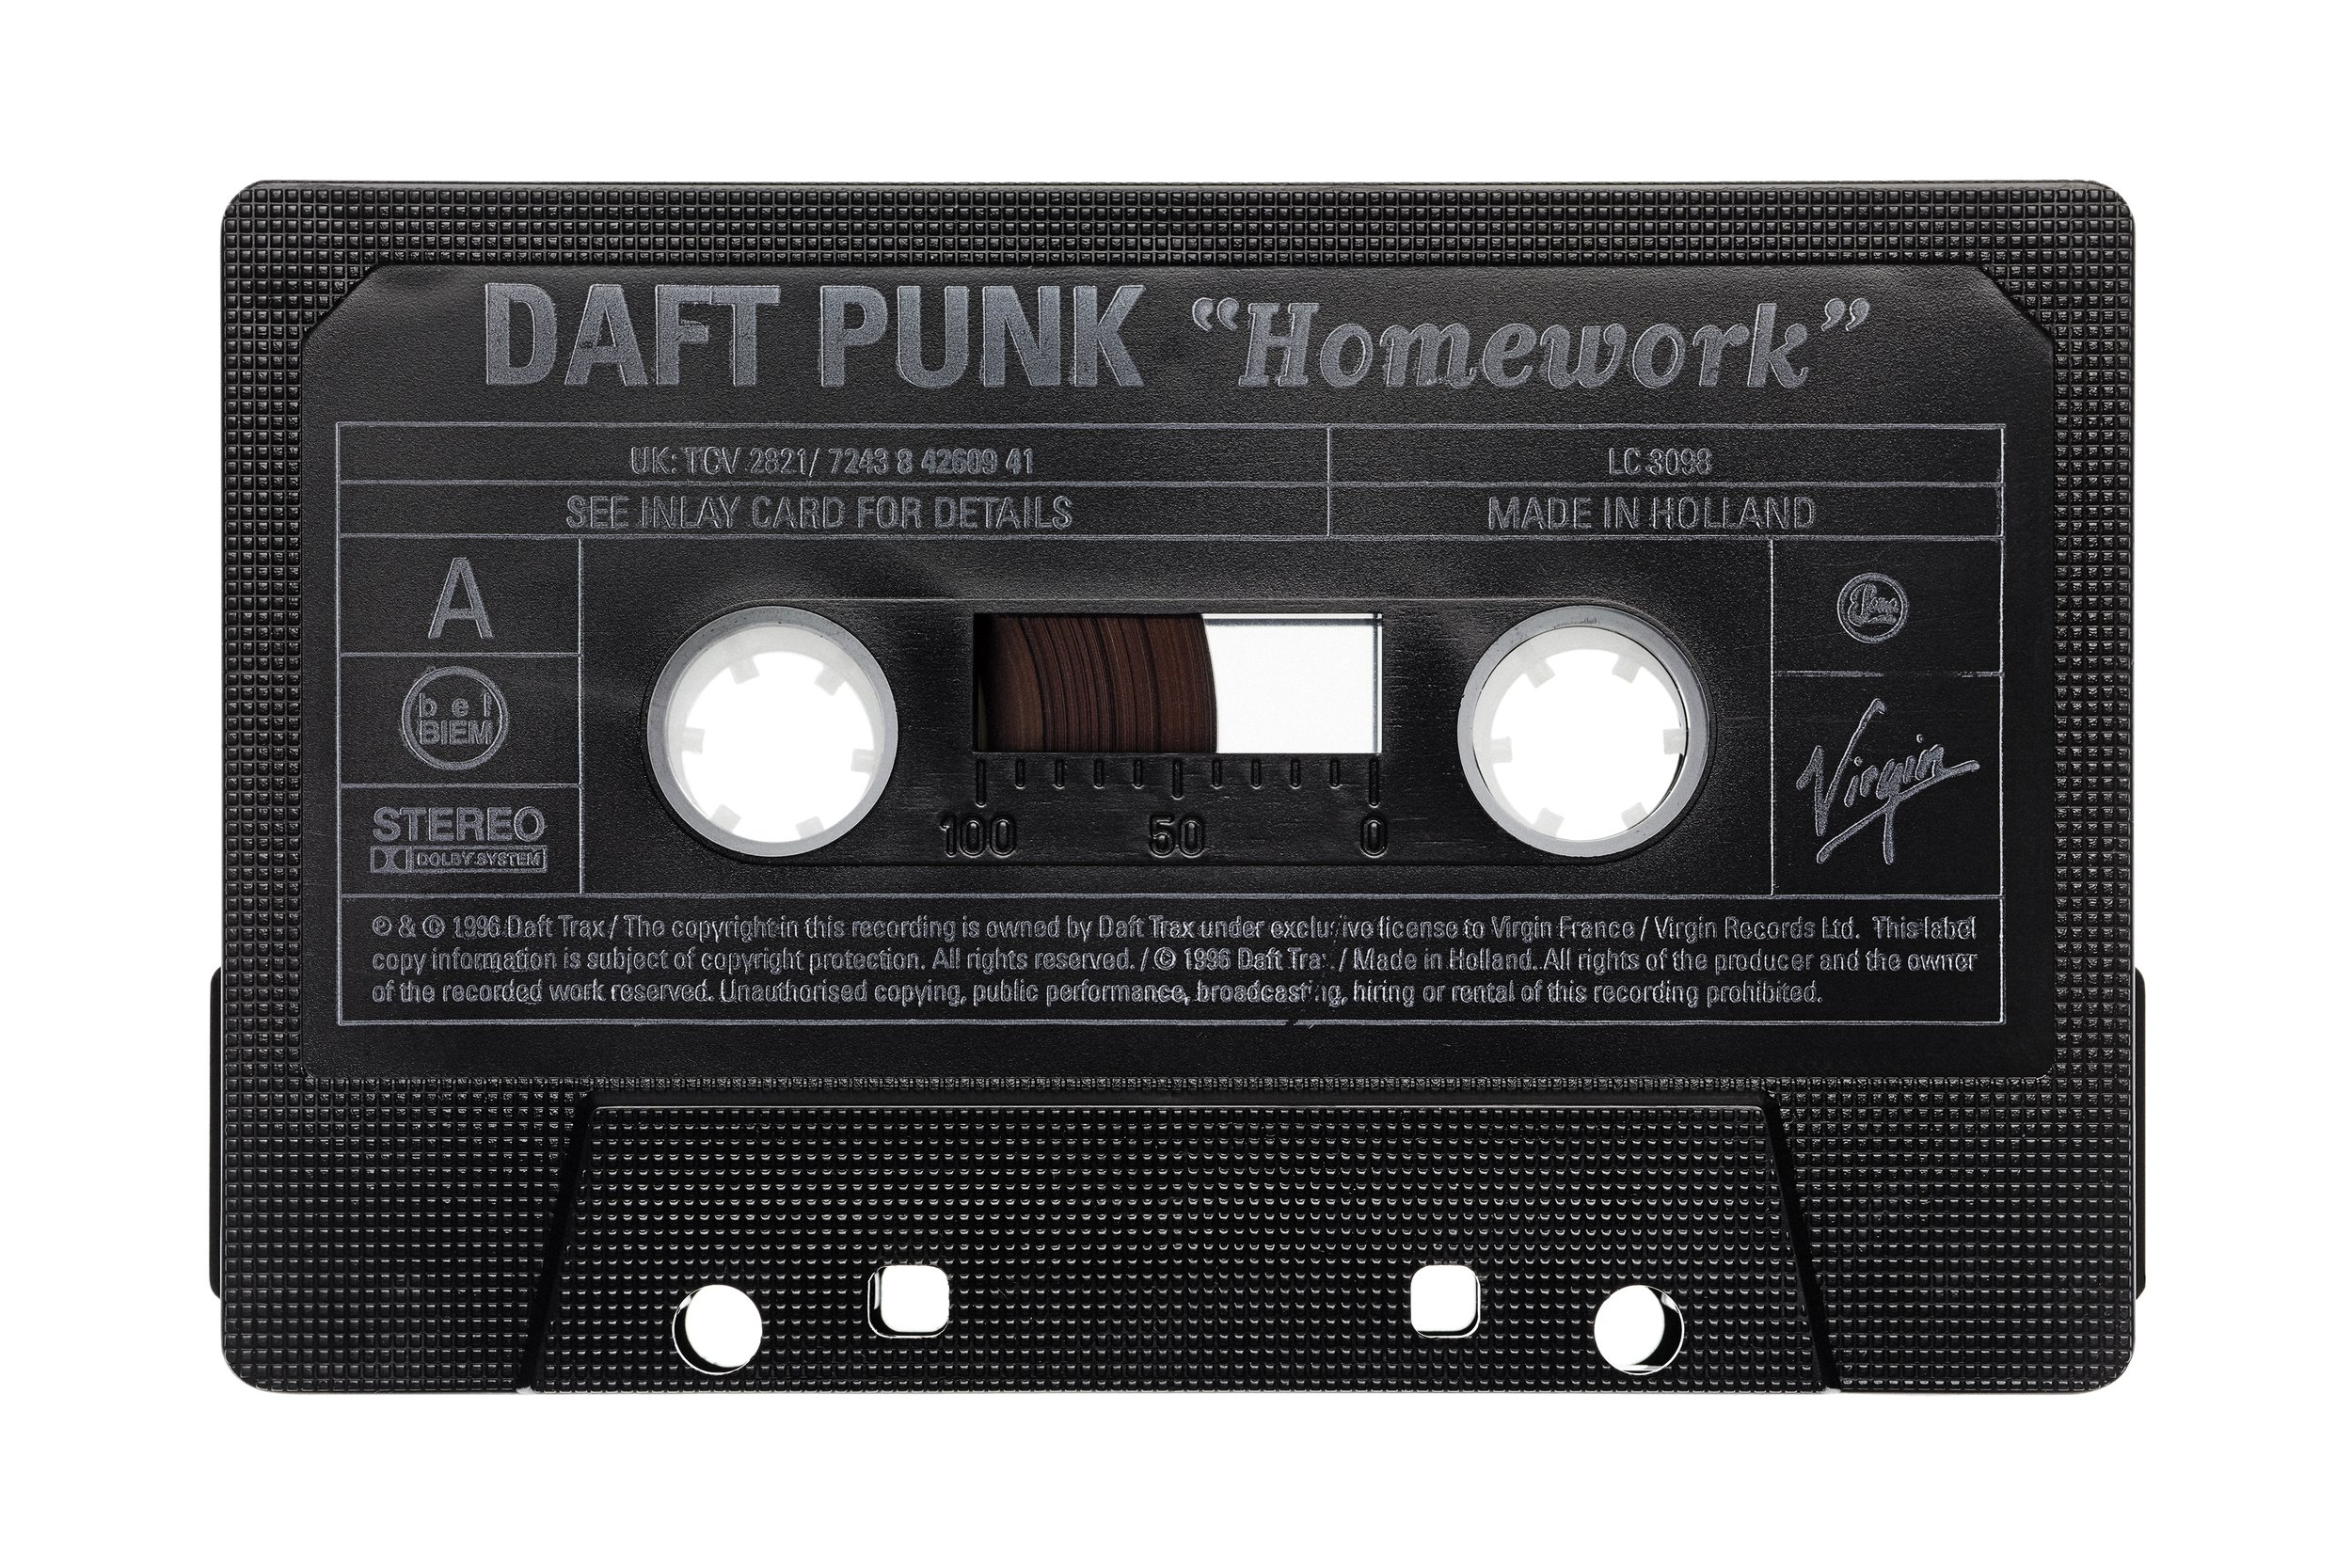  Daft Punk - Homework  Available through   Clic Gallery   in New York.    Contact   